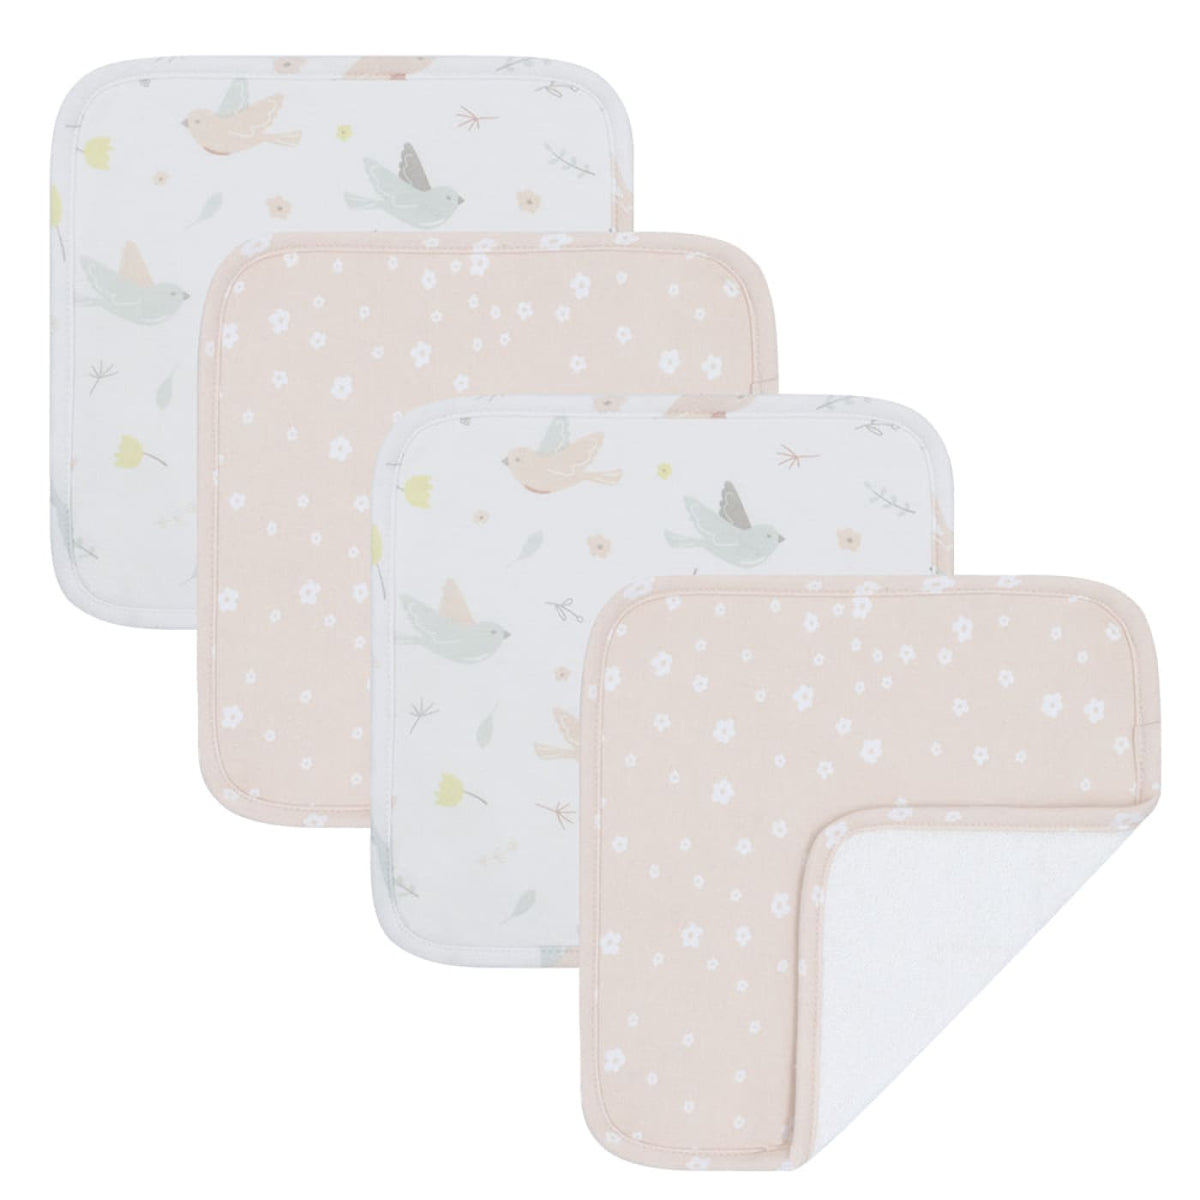 Living Textiles Wash Cloths 4 pack - Ava/Blush Floral - Ava/Blush Floral - BATHTIME &amp; CHANGING - TOWELS/WASHERS